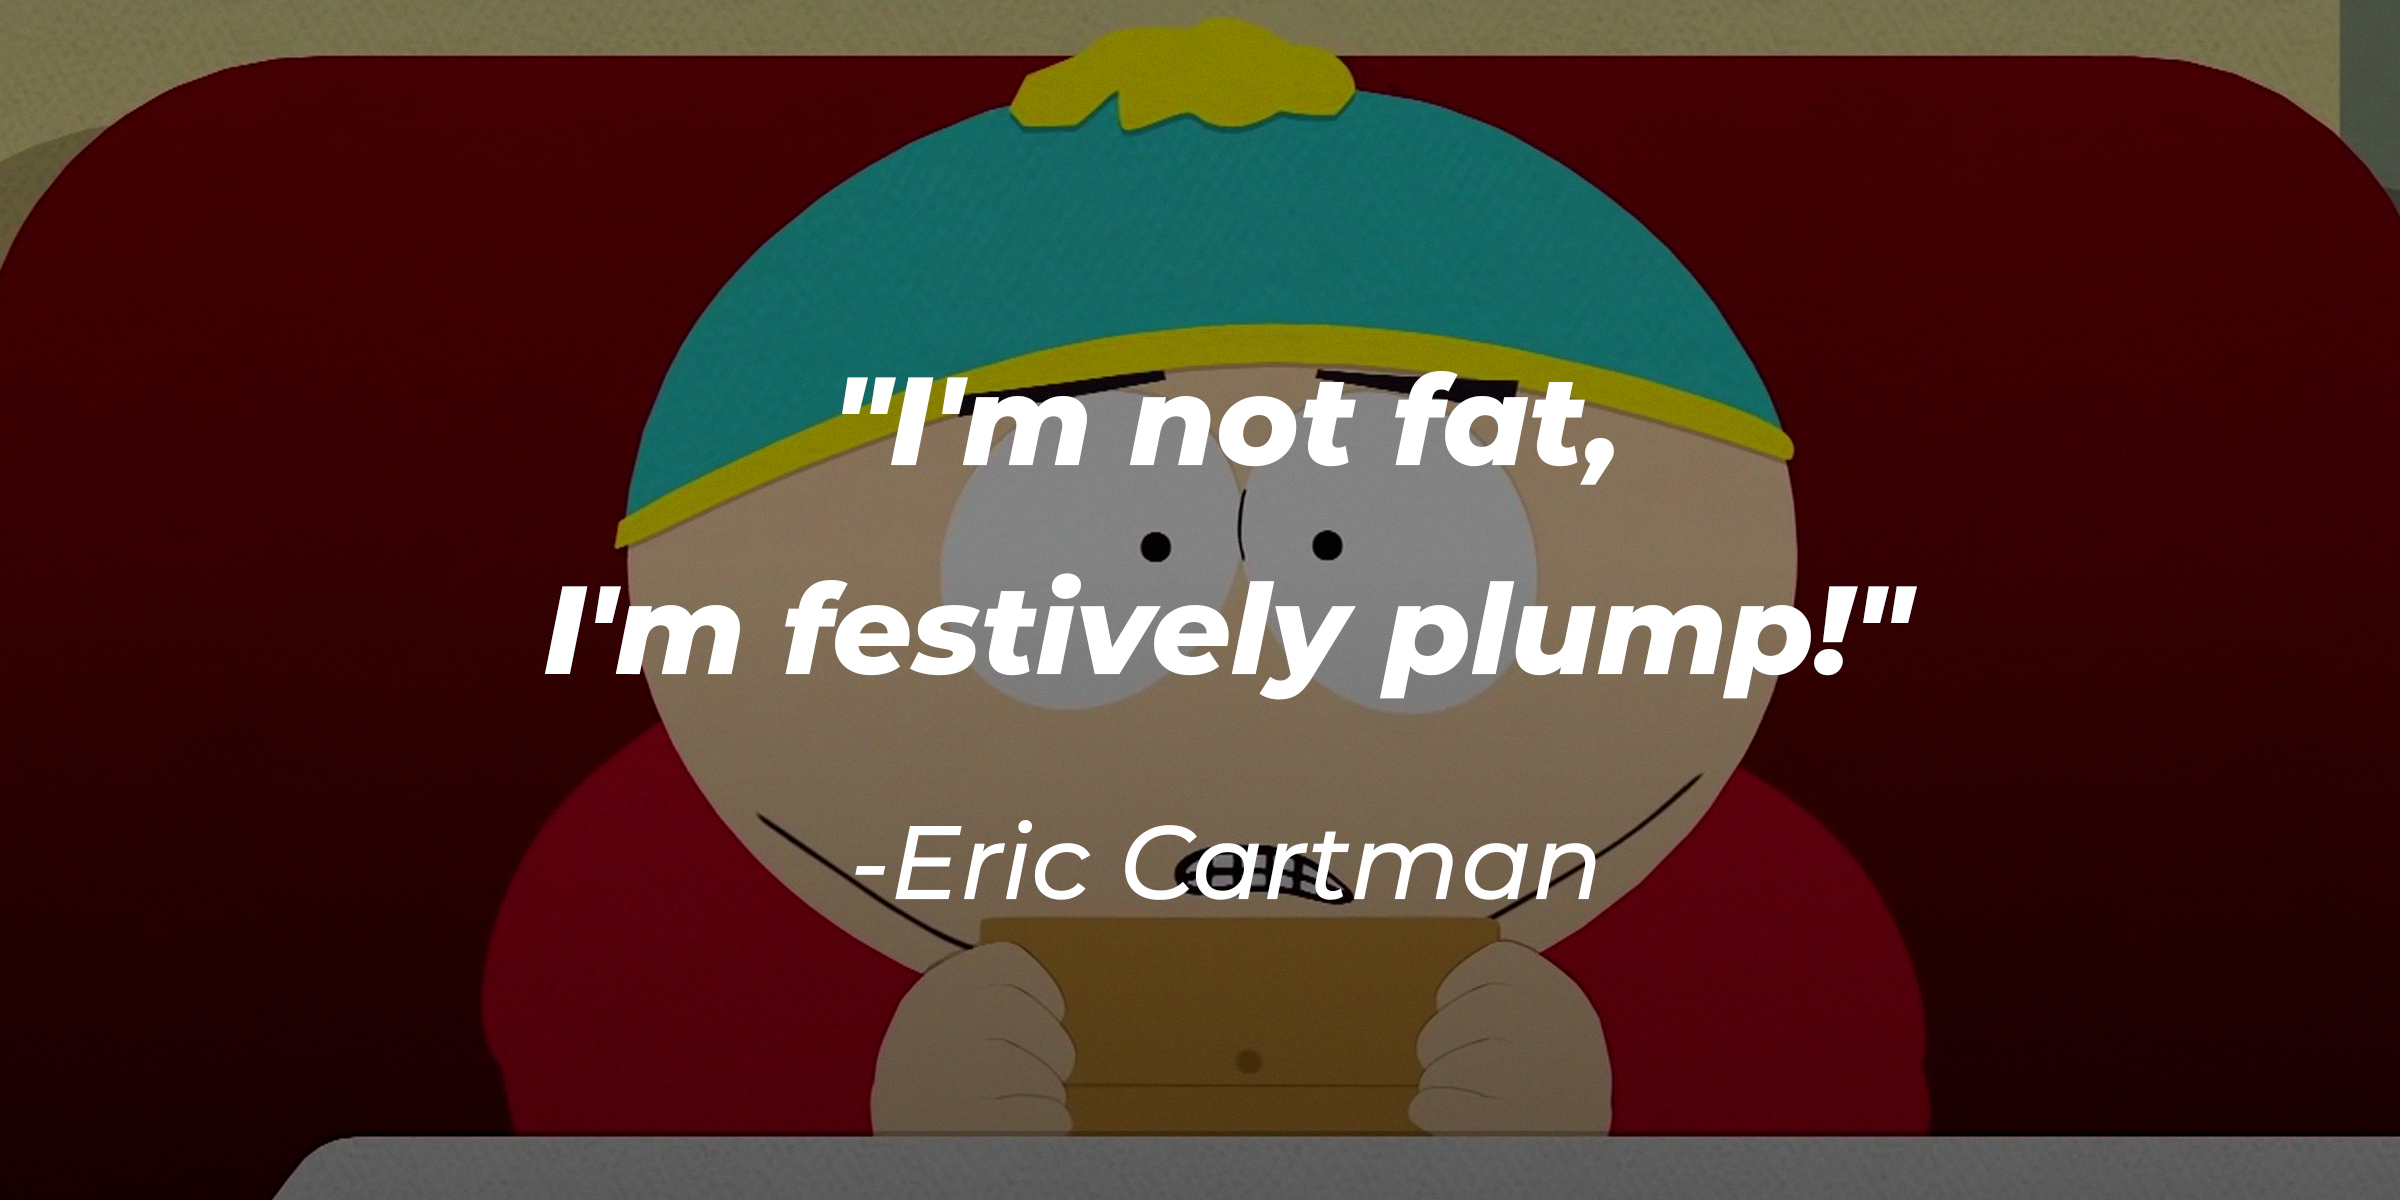 An image of Eric Cartman with his quote: "I'm not fat, I'm festively plump!" | Source: Youtube.com/southpark